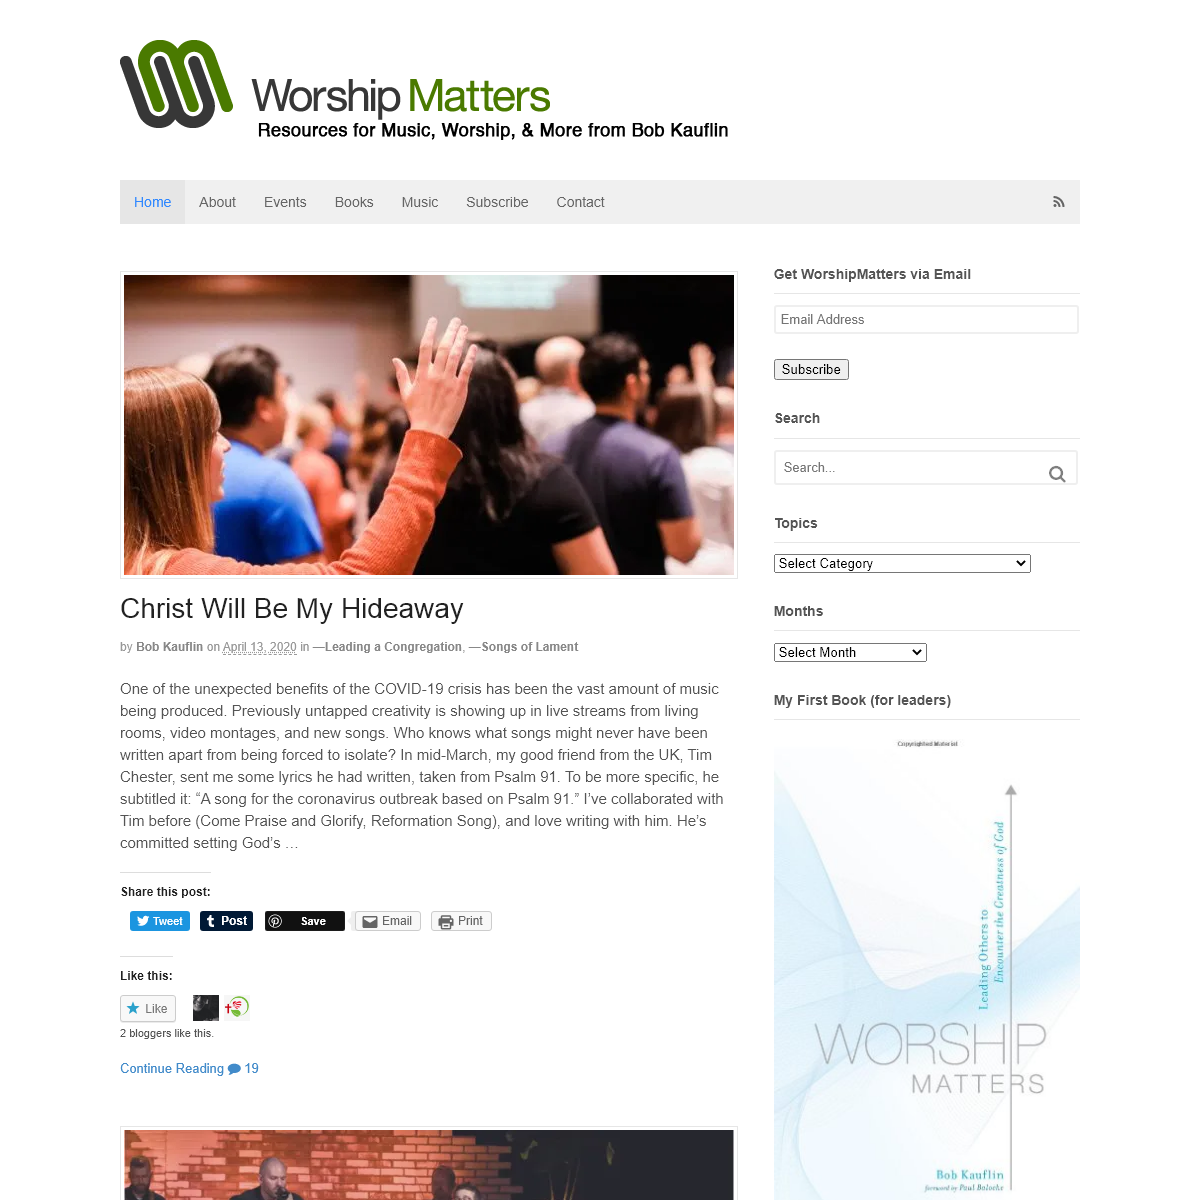 A complete backup of worshipmatters.com